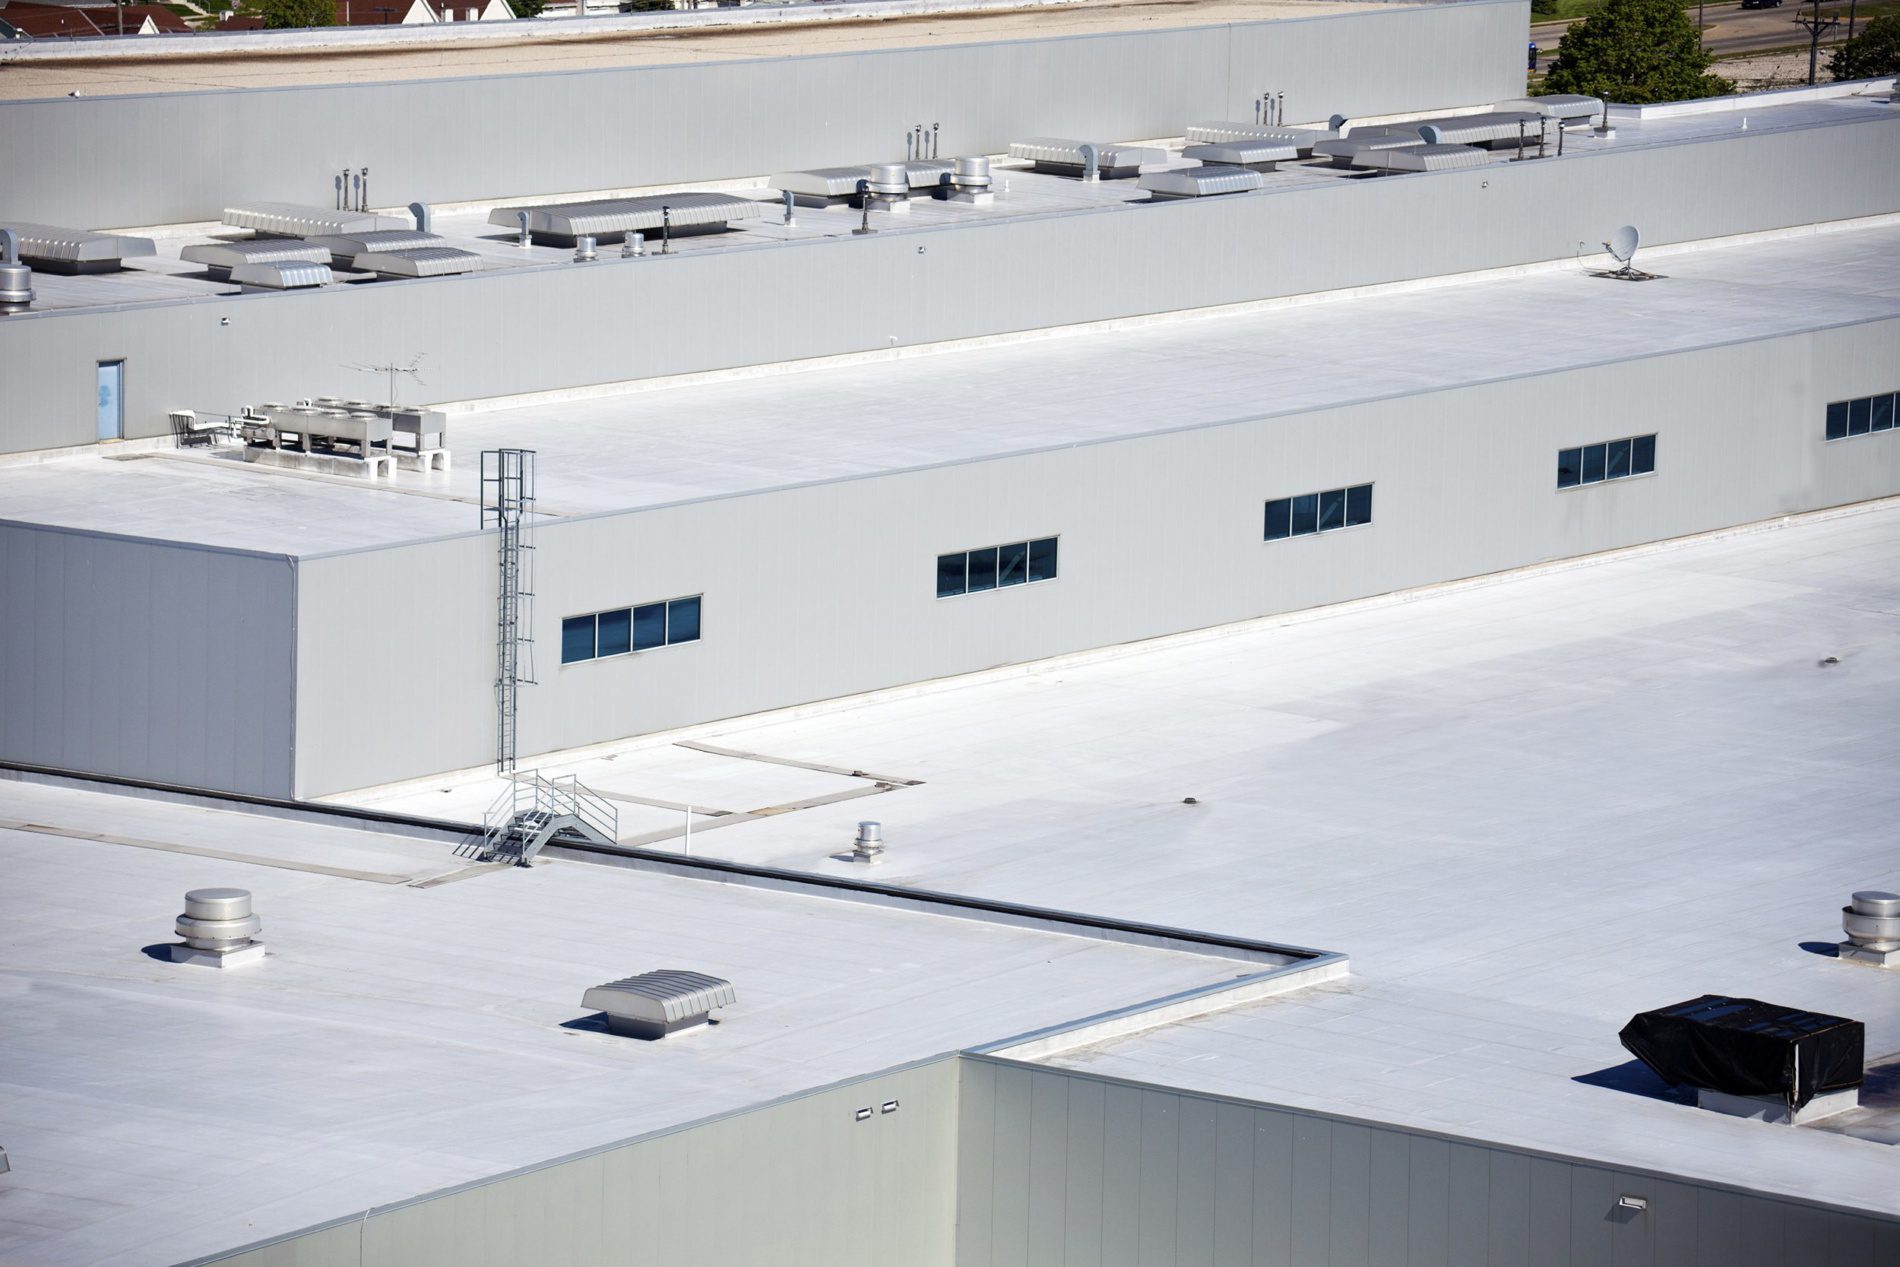 Commercial roof types - large warehouse.